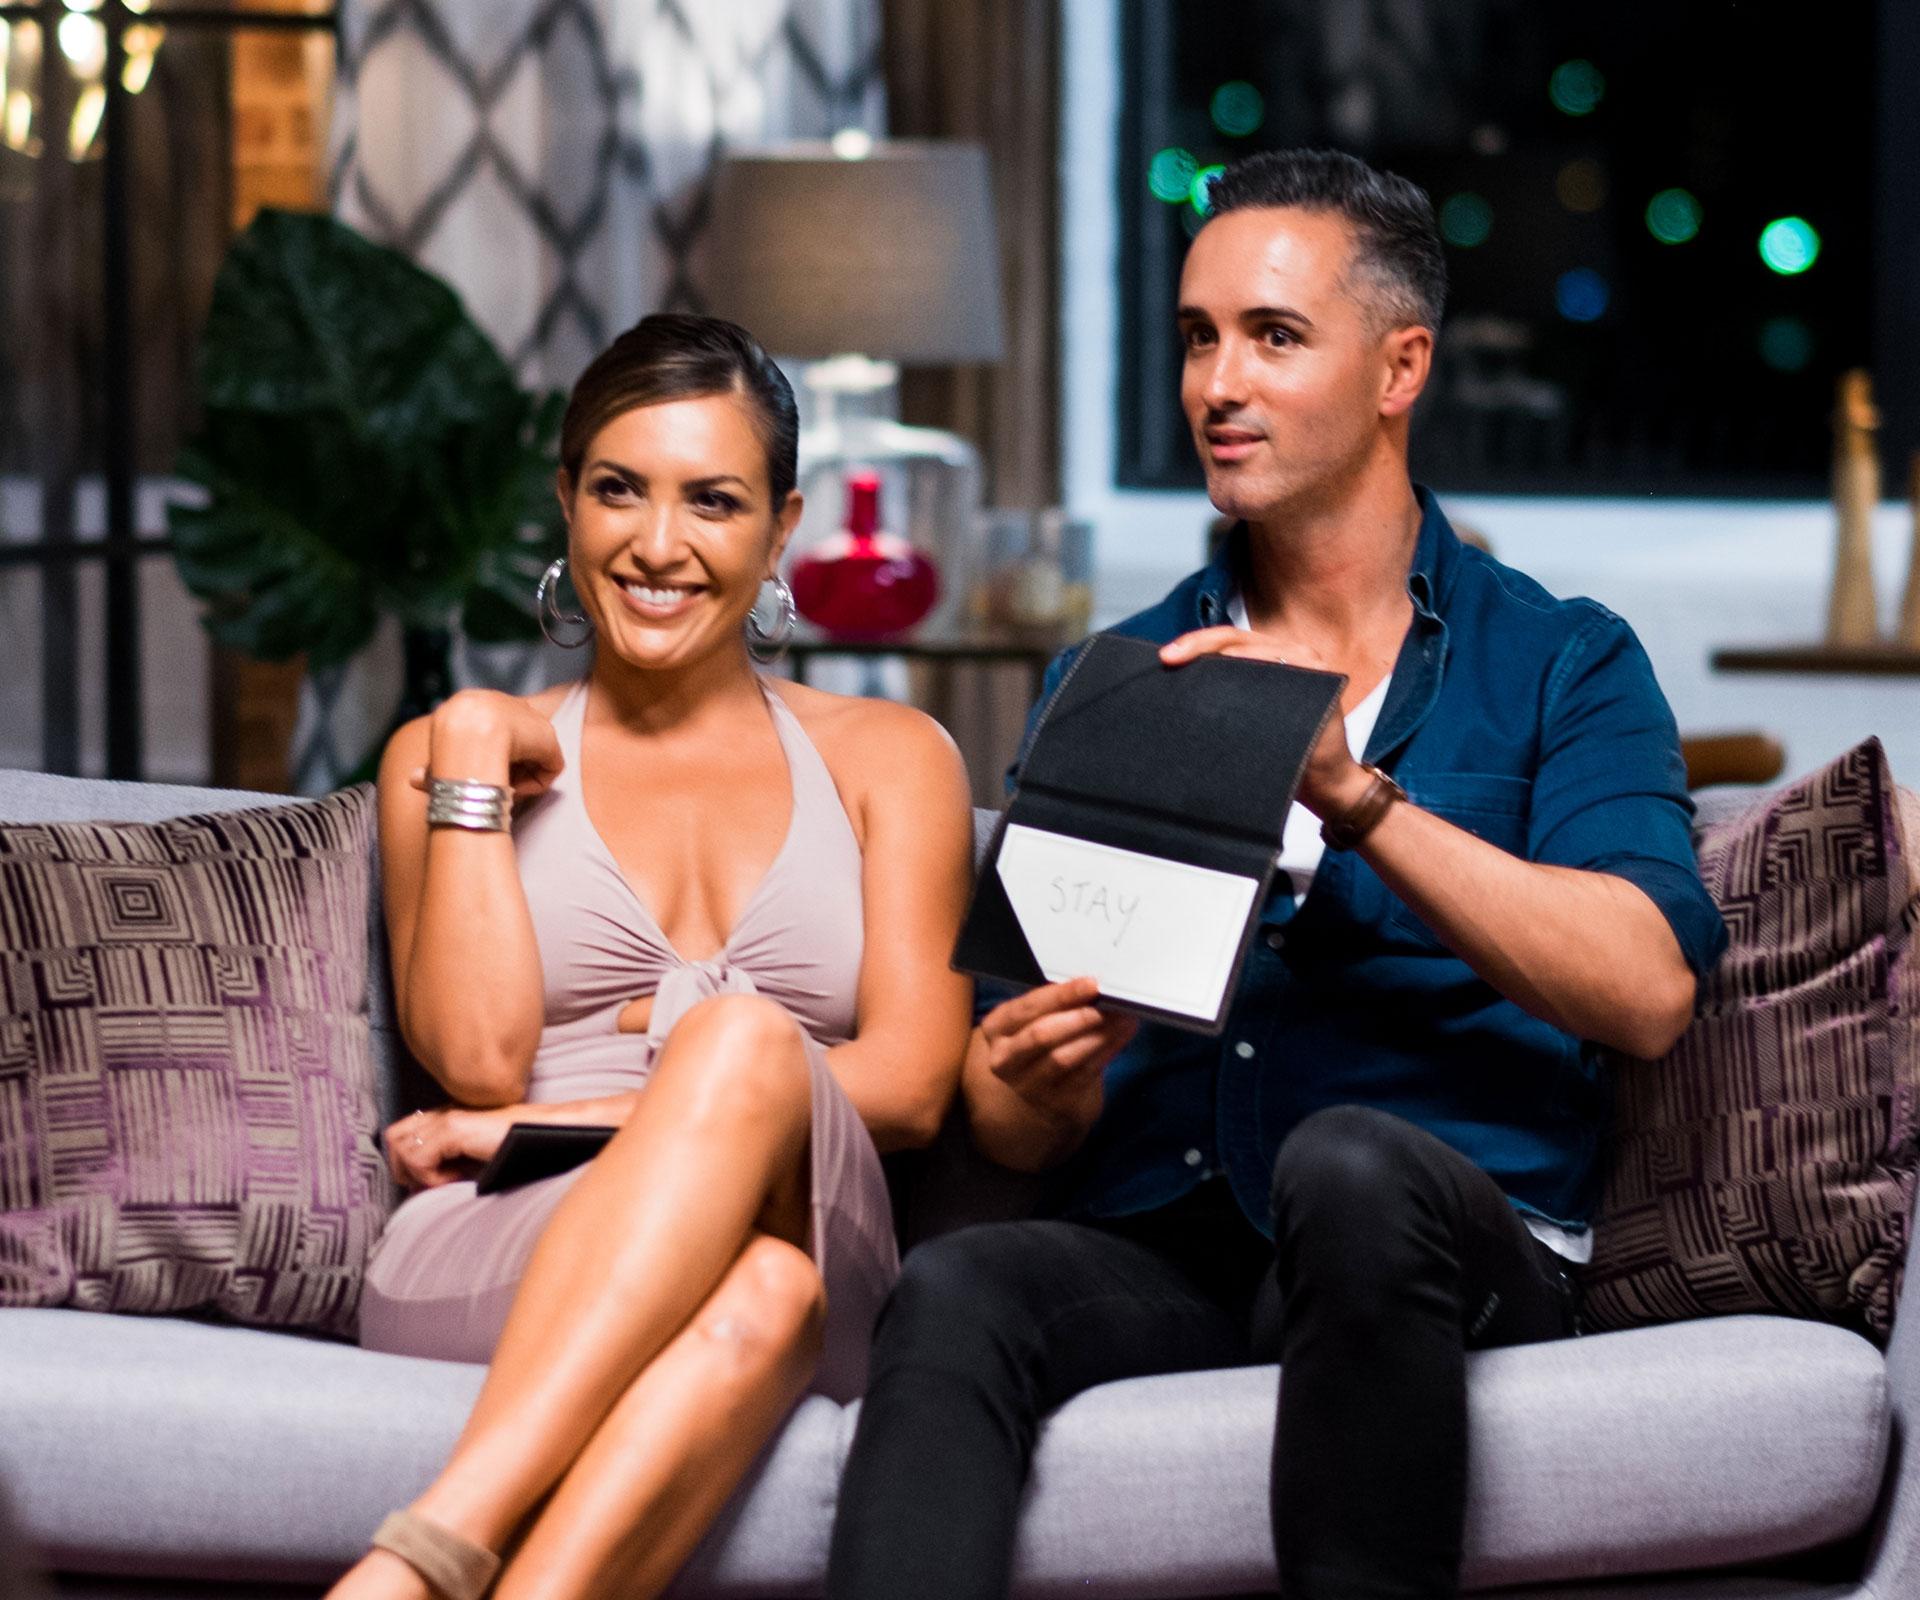 Nadia and Anthony, Married At First Sight